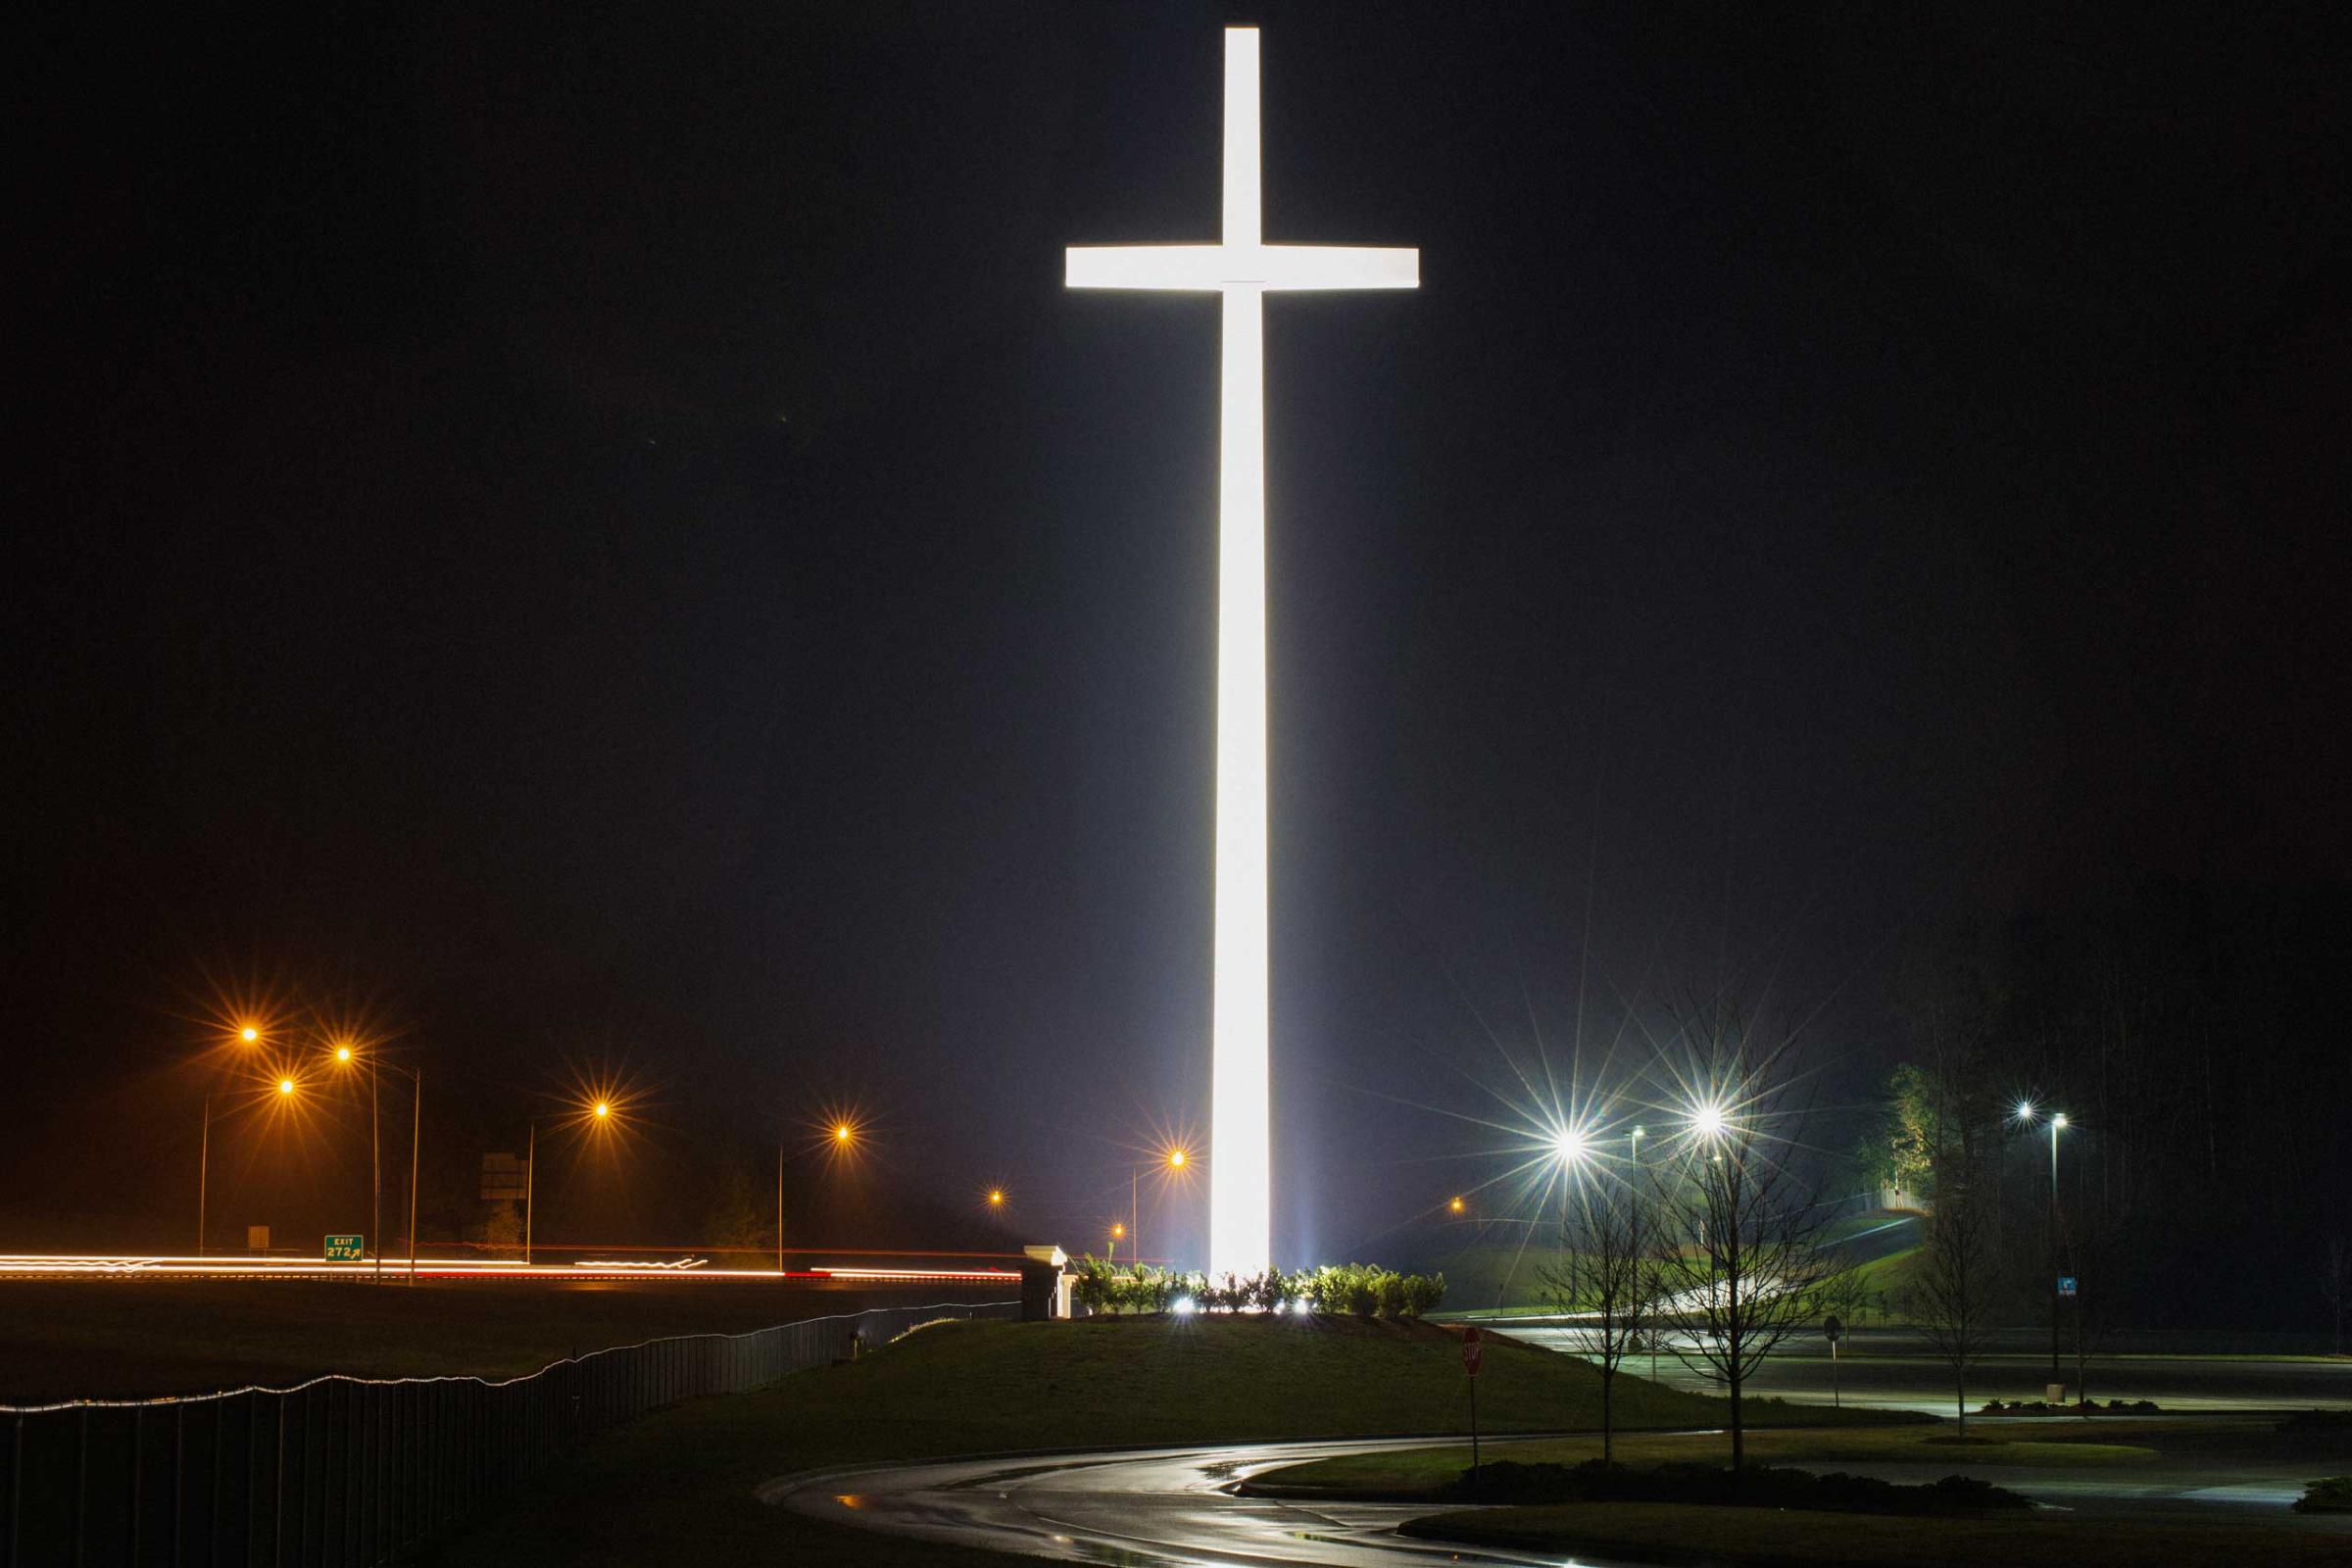 A giant cross by highway I-65 is illuminated at night, marking the site of Gardendale First Baptist Church in Gardendale, Ala. on March 21, 2015.